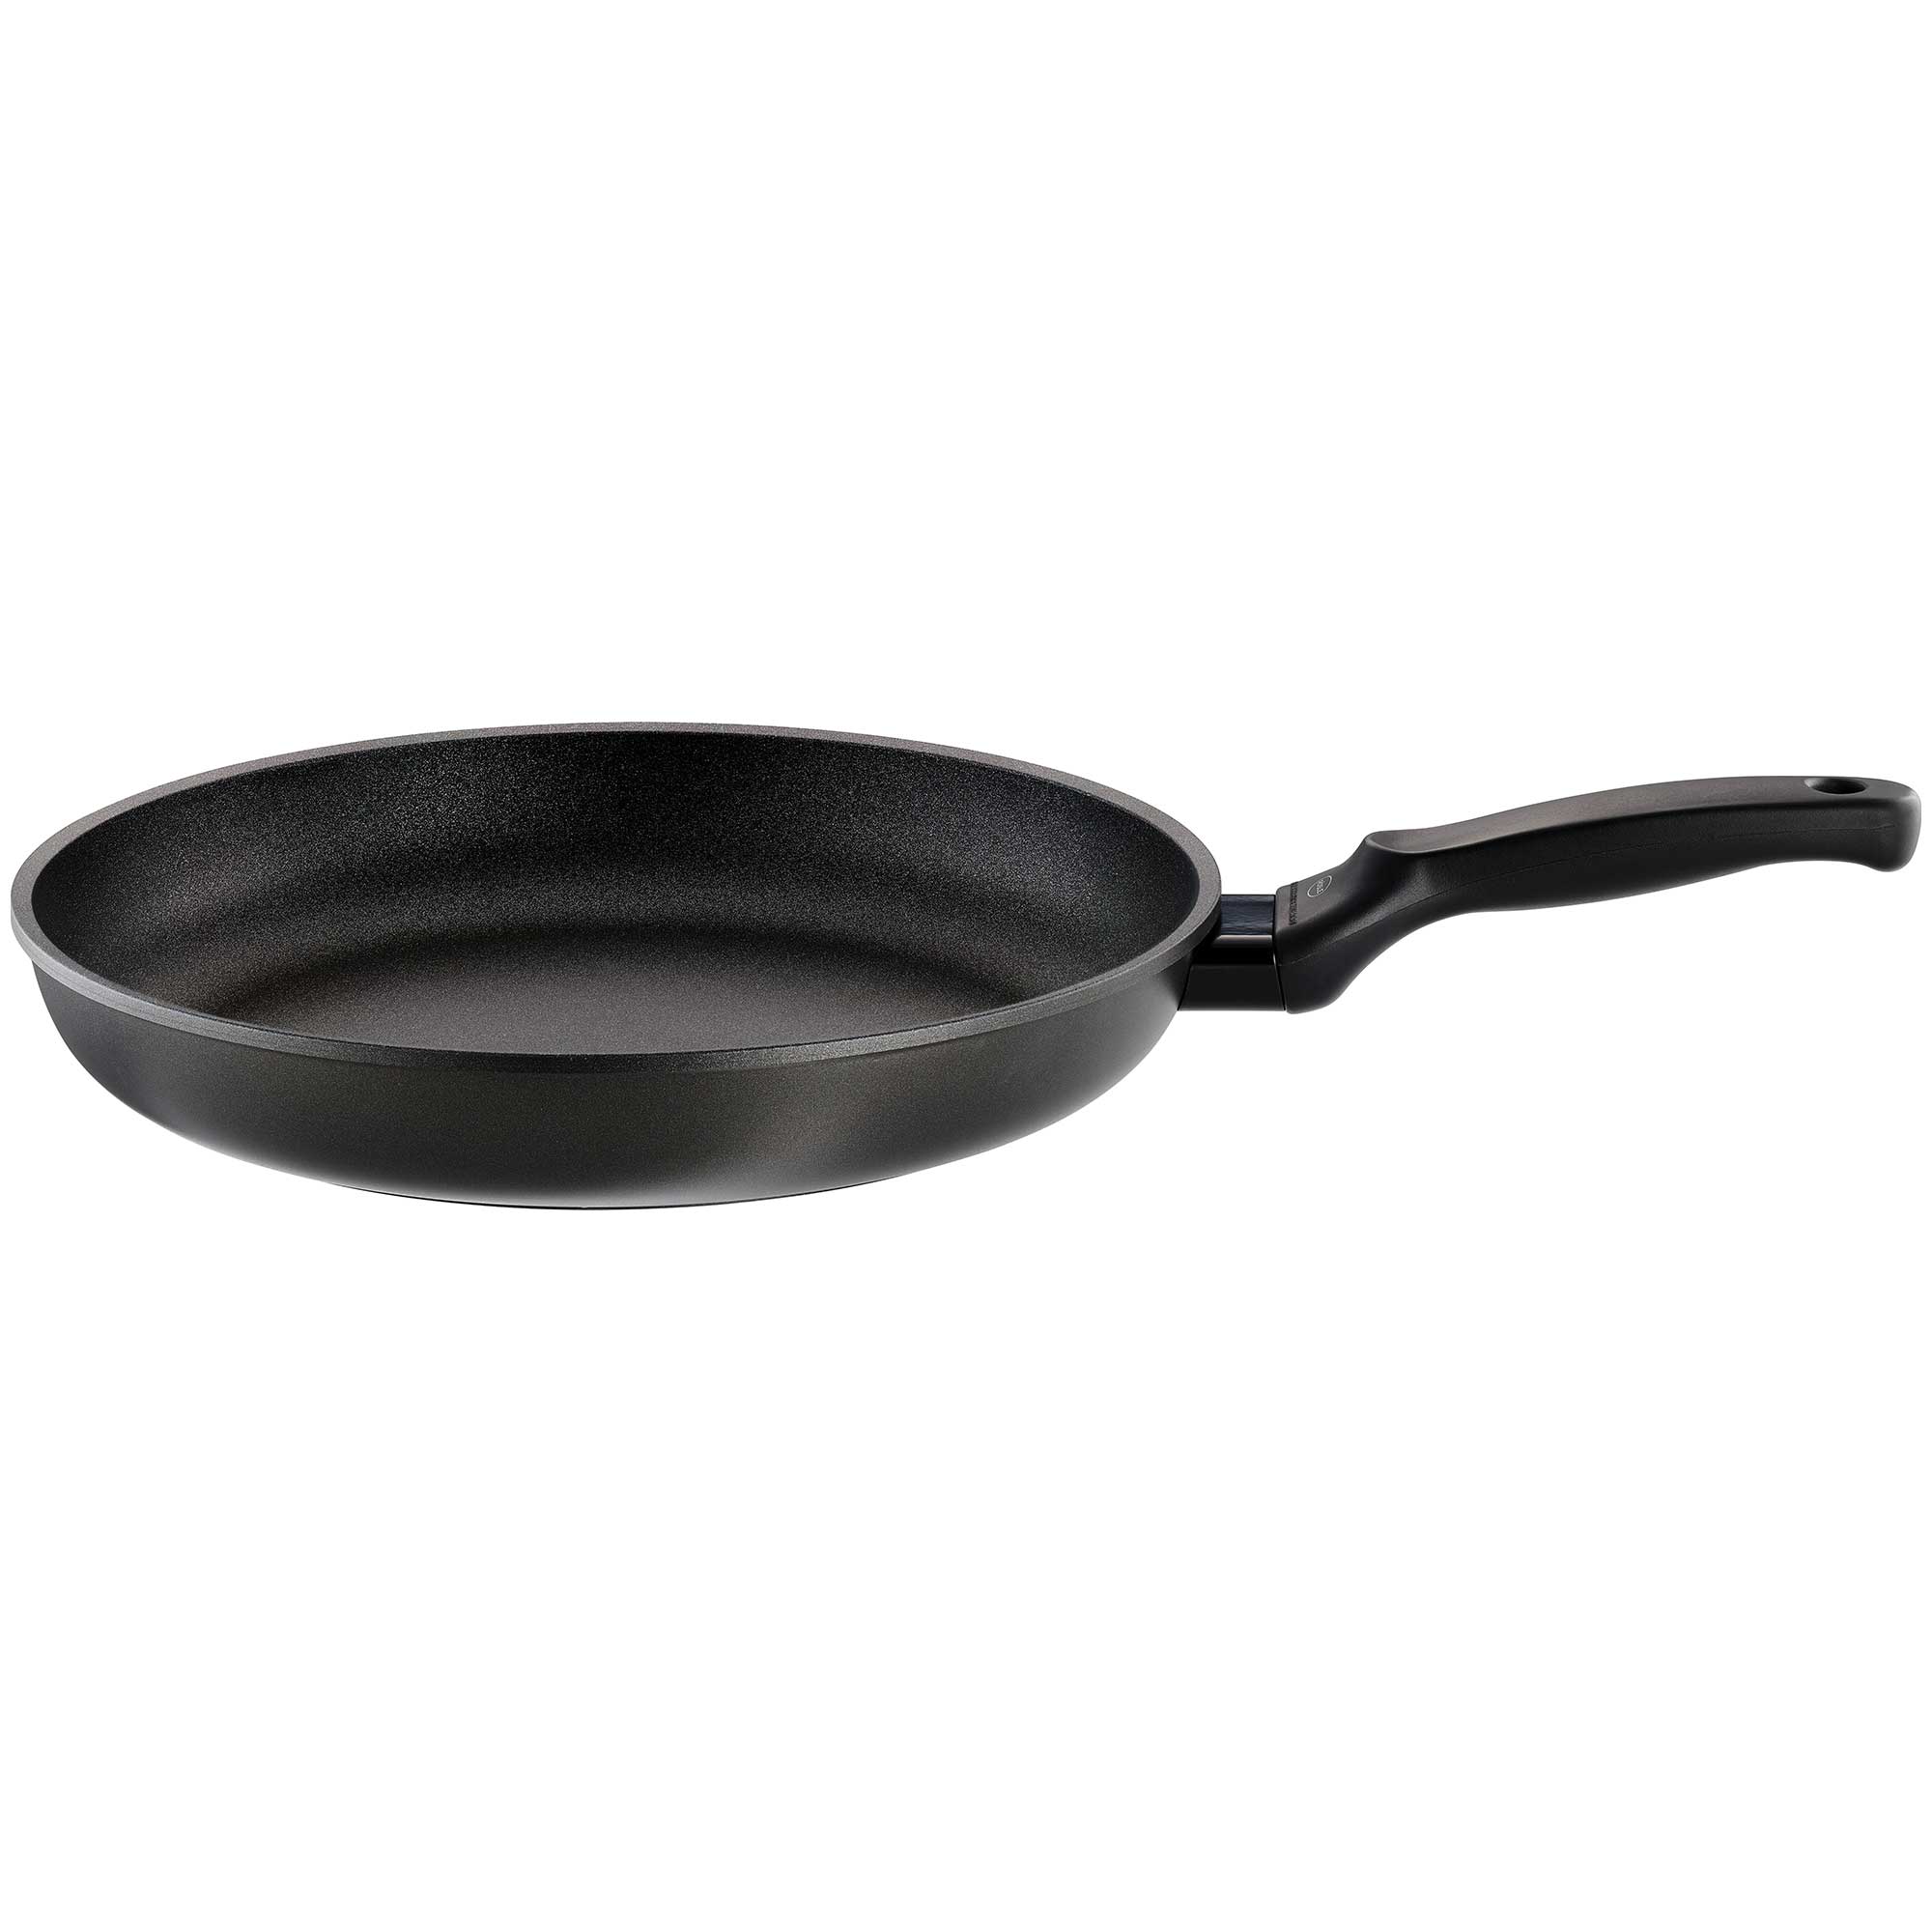 Frying Pan "Cadini" Ø 32 cm | 12.6 in. from cast aluminum with non-stick coating ProResist